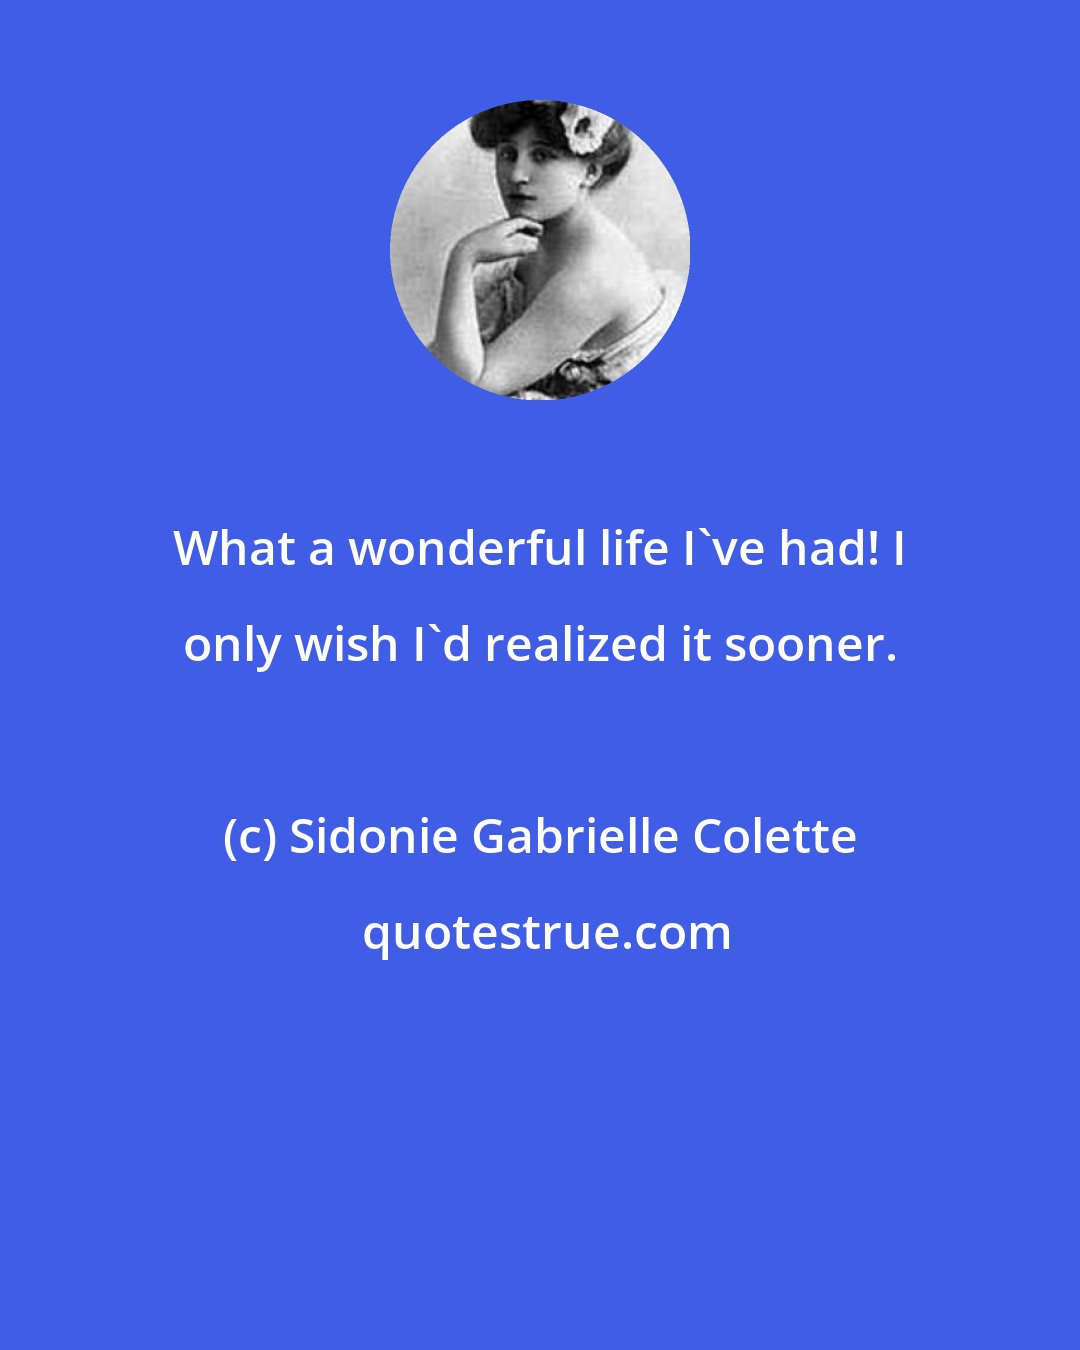 Sidonie Gabrielle Colette: What a wonderful life I've had! I only wish I'd realized it sooner.